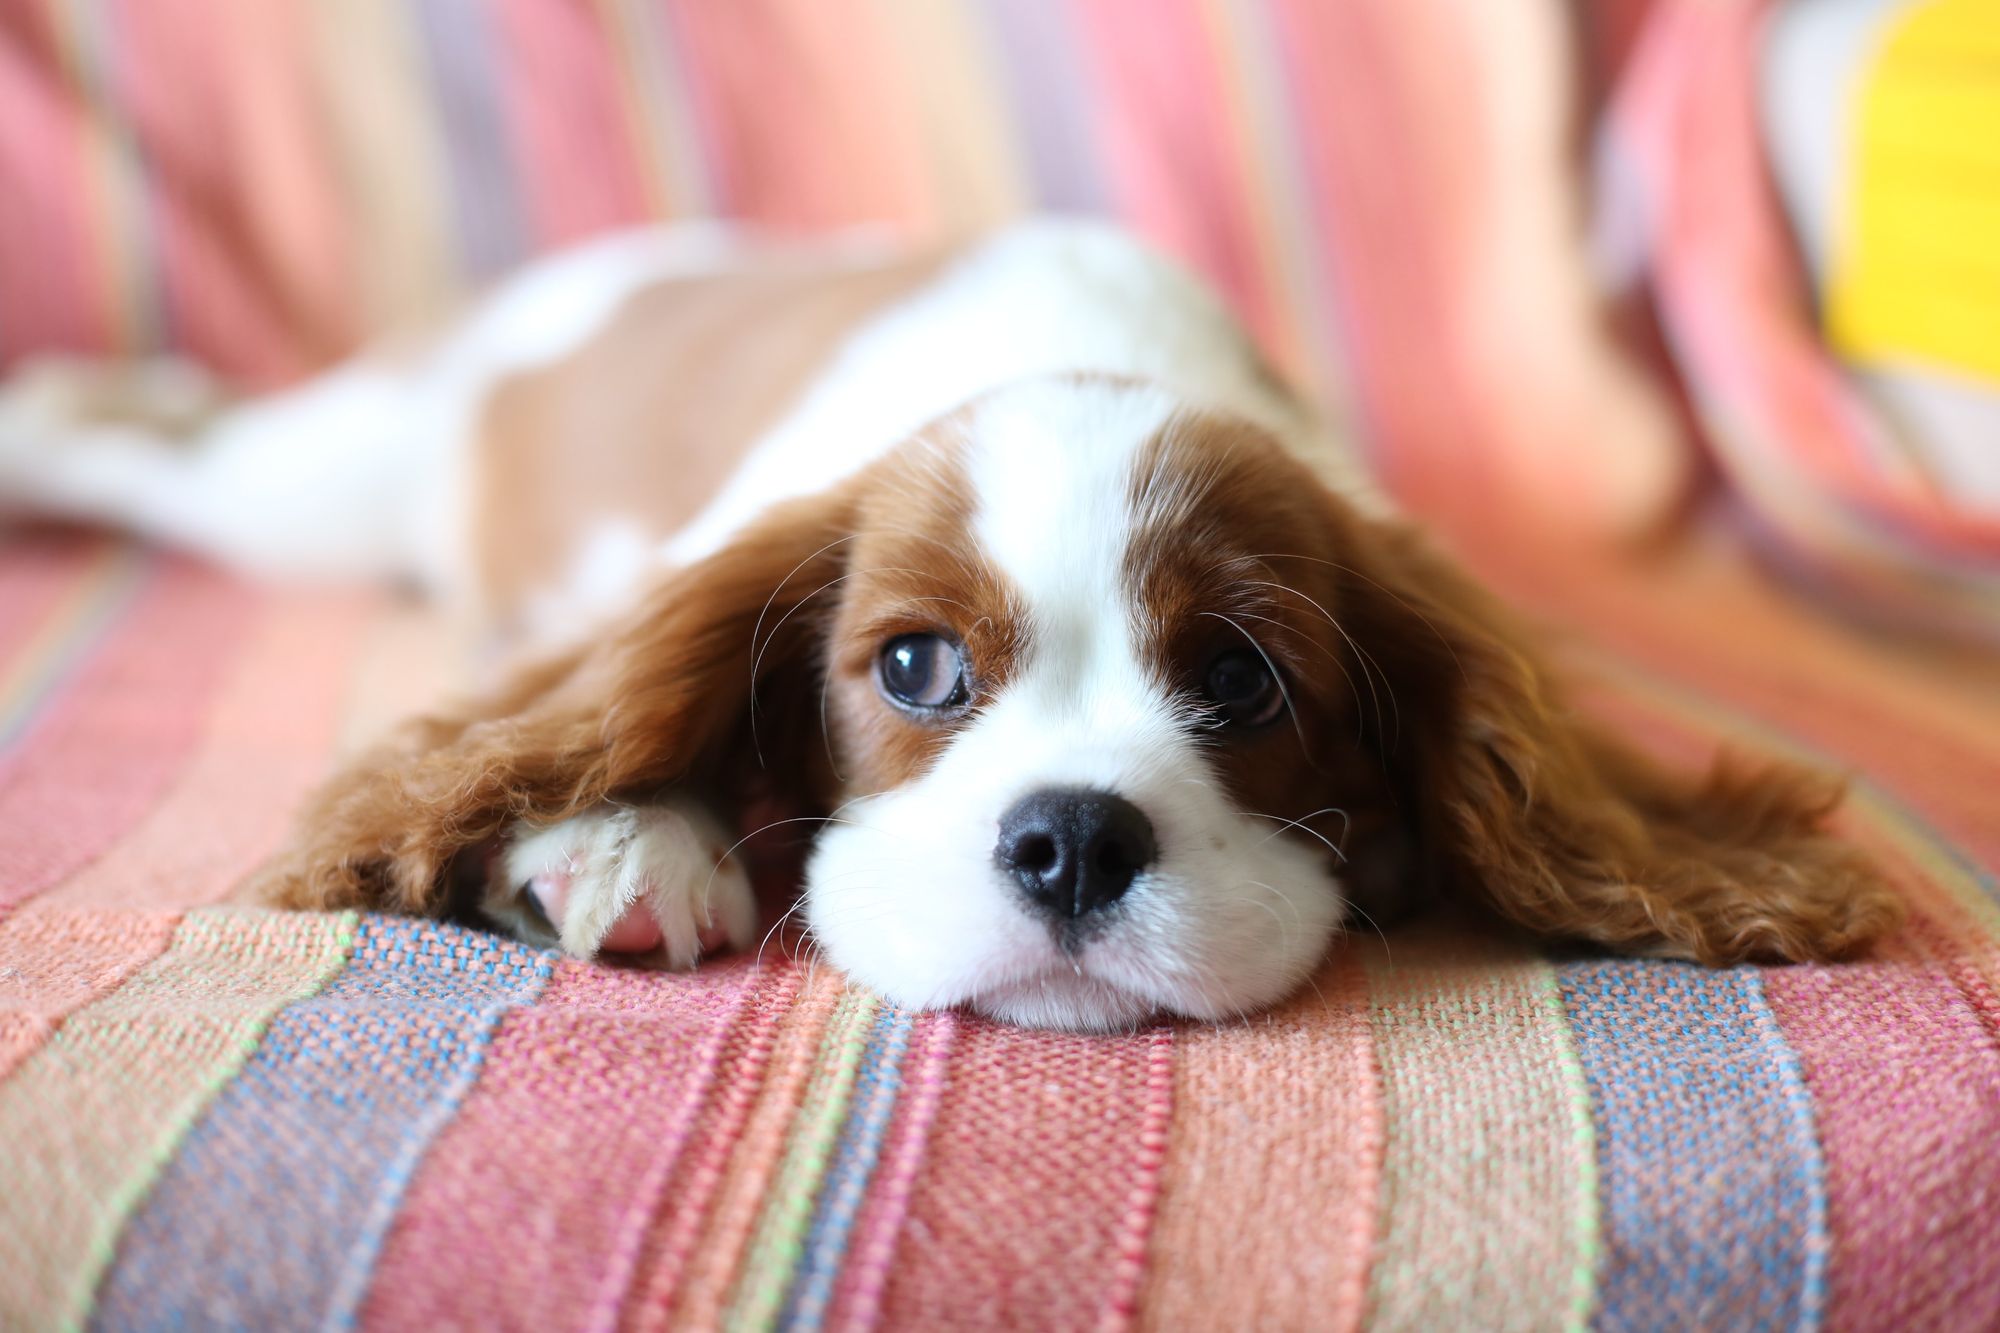 Cavalier King Charles Spaniel - least active dog breed